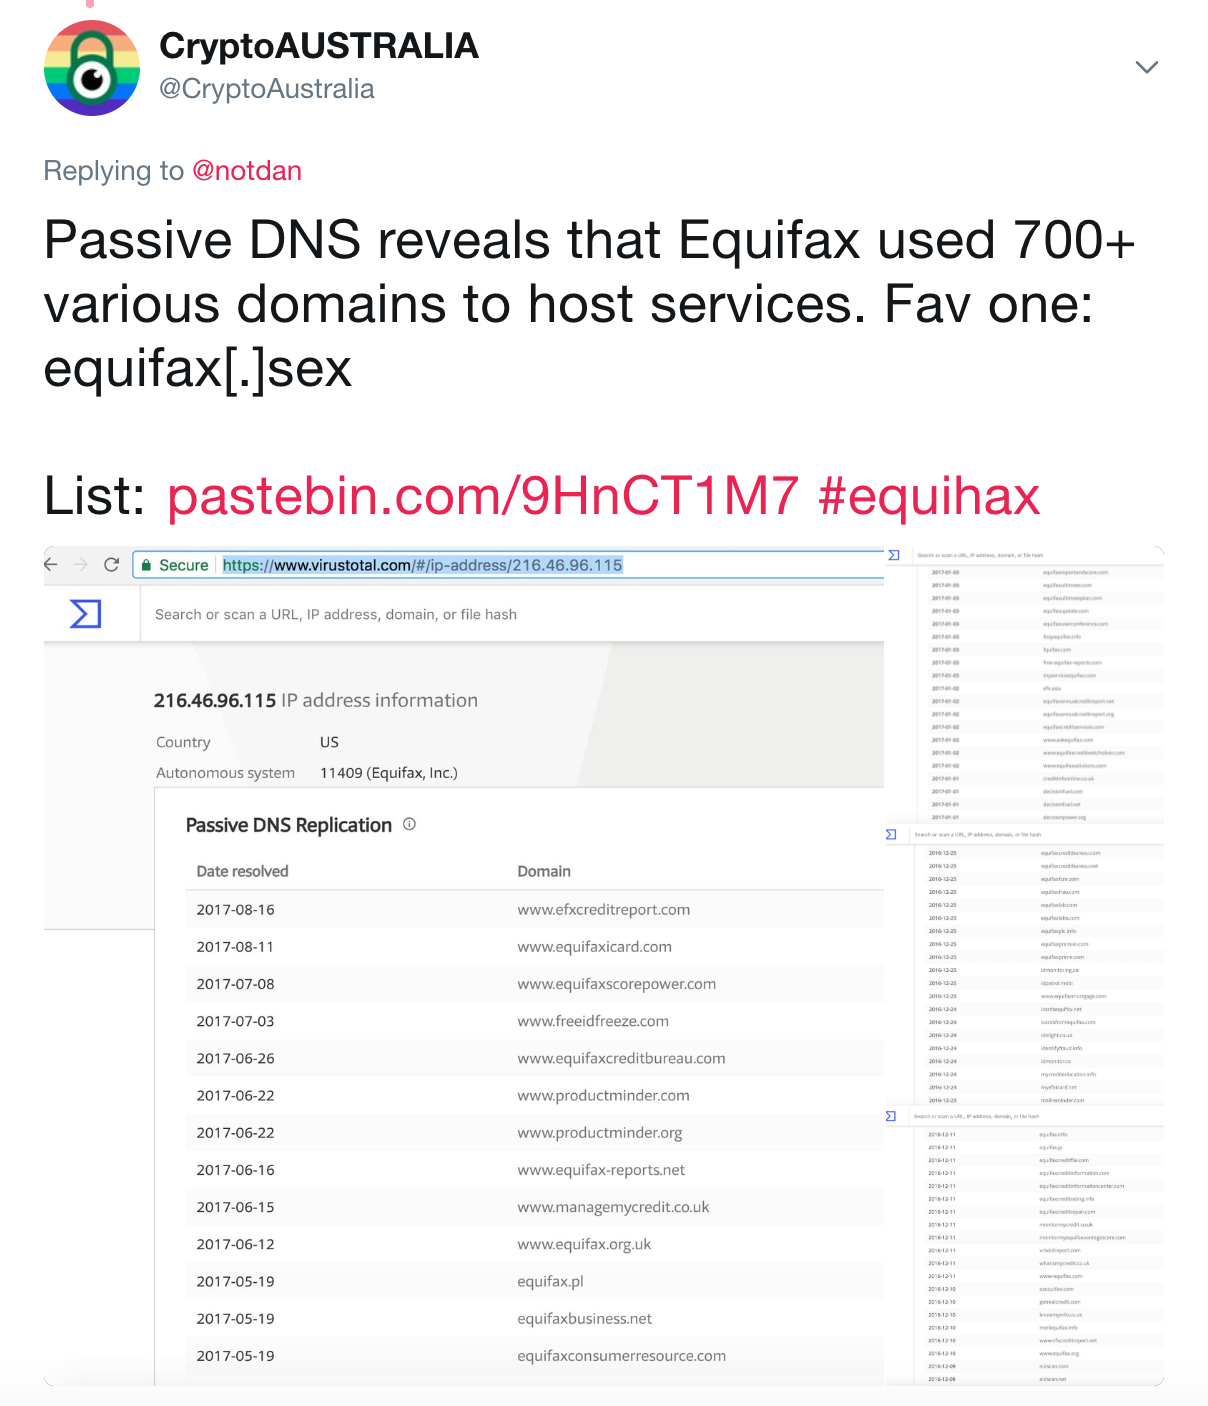 Domain names include strage ones like 'equifax.sex'